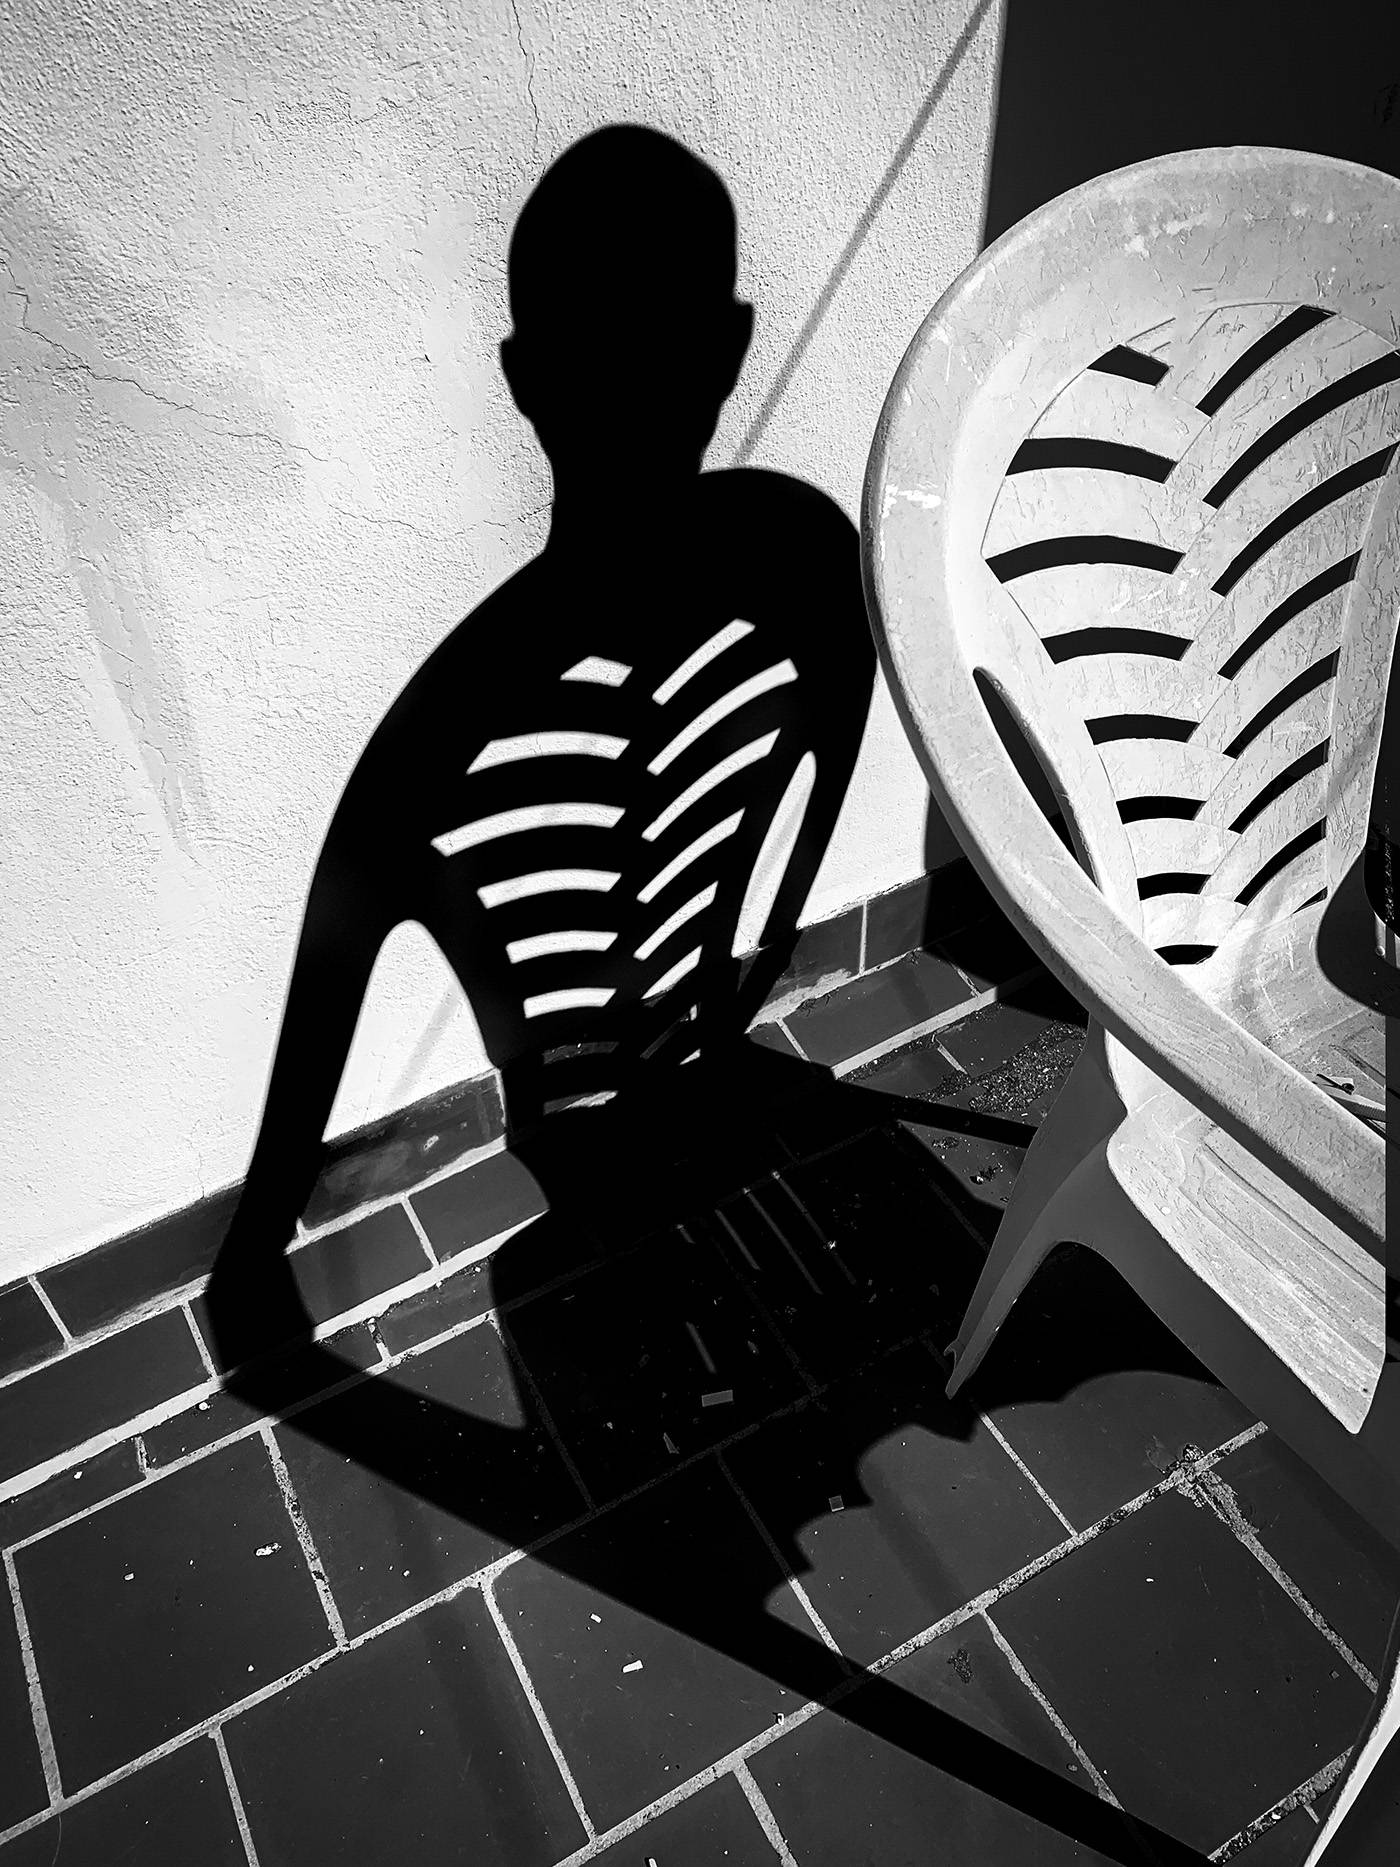 Shadow of a man with the form of an alien with his ribs visible thanks to a chair.